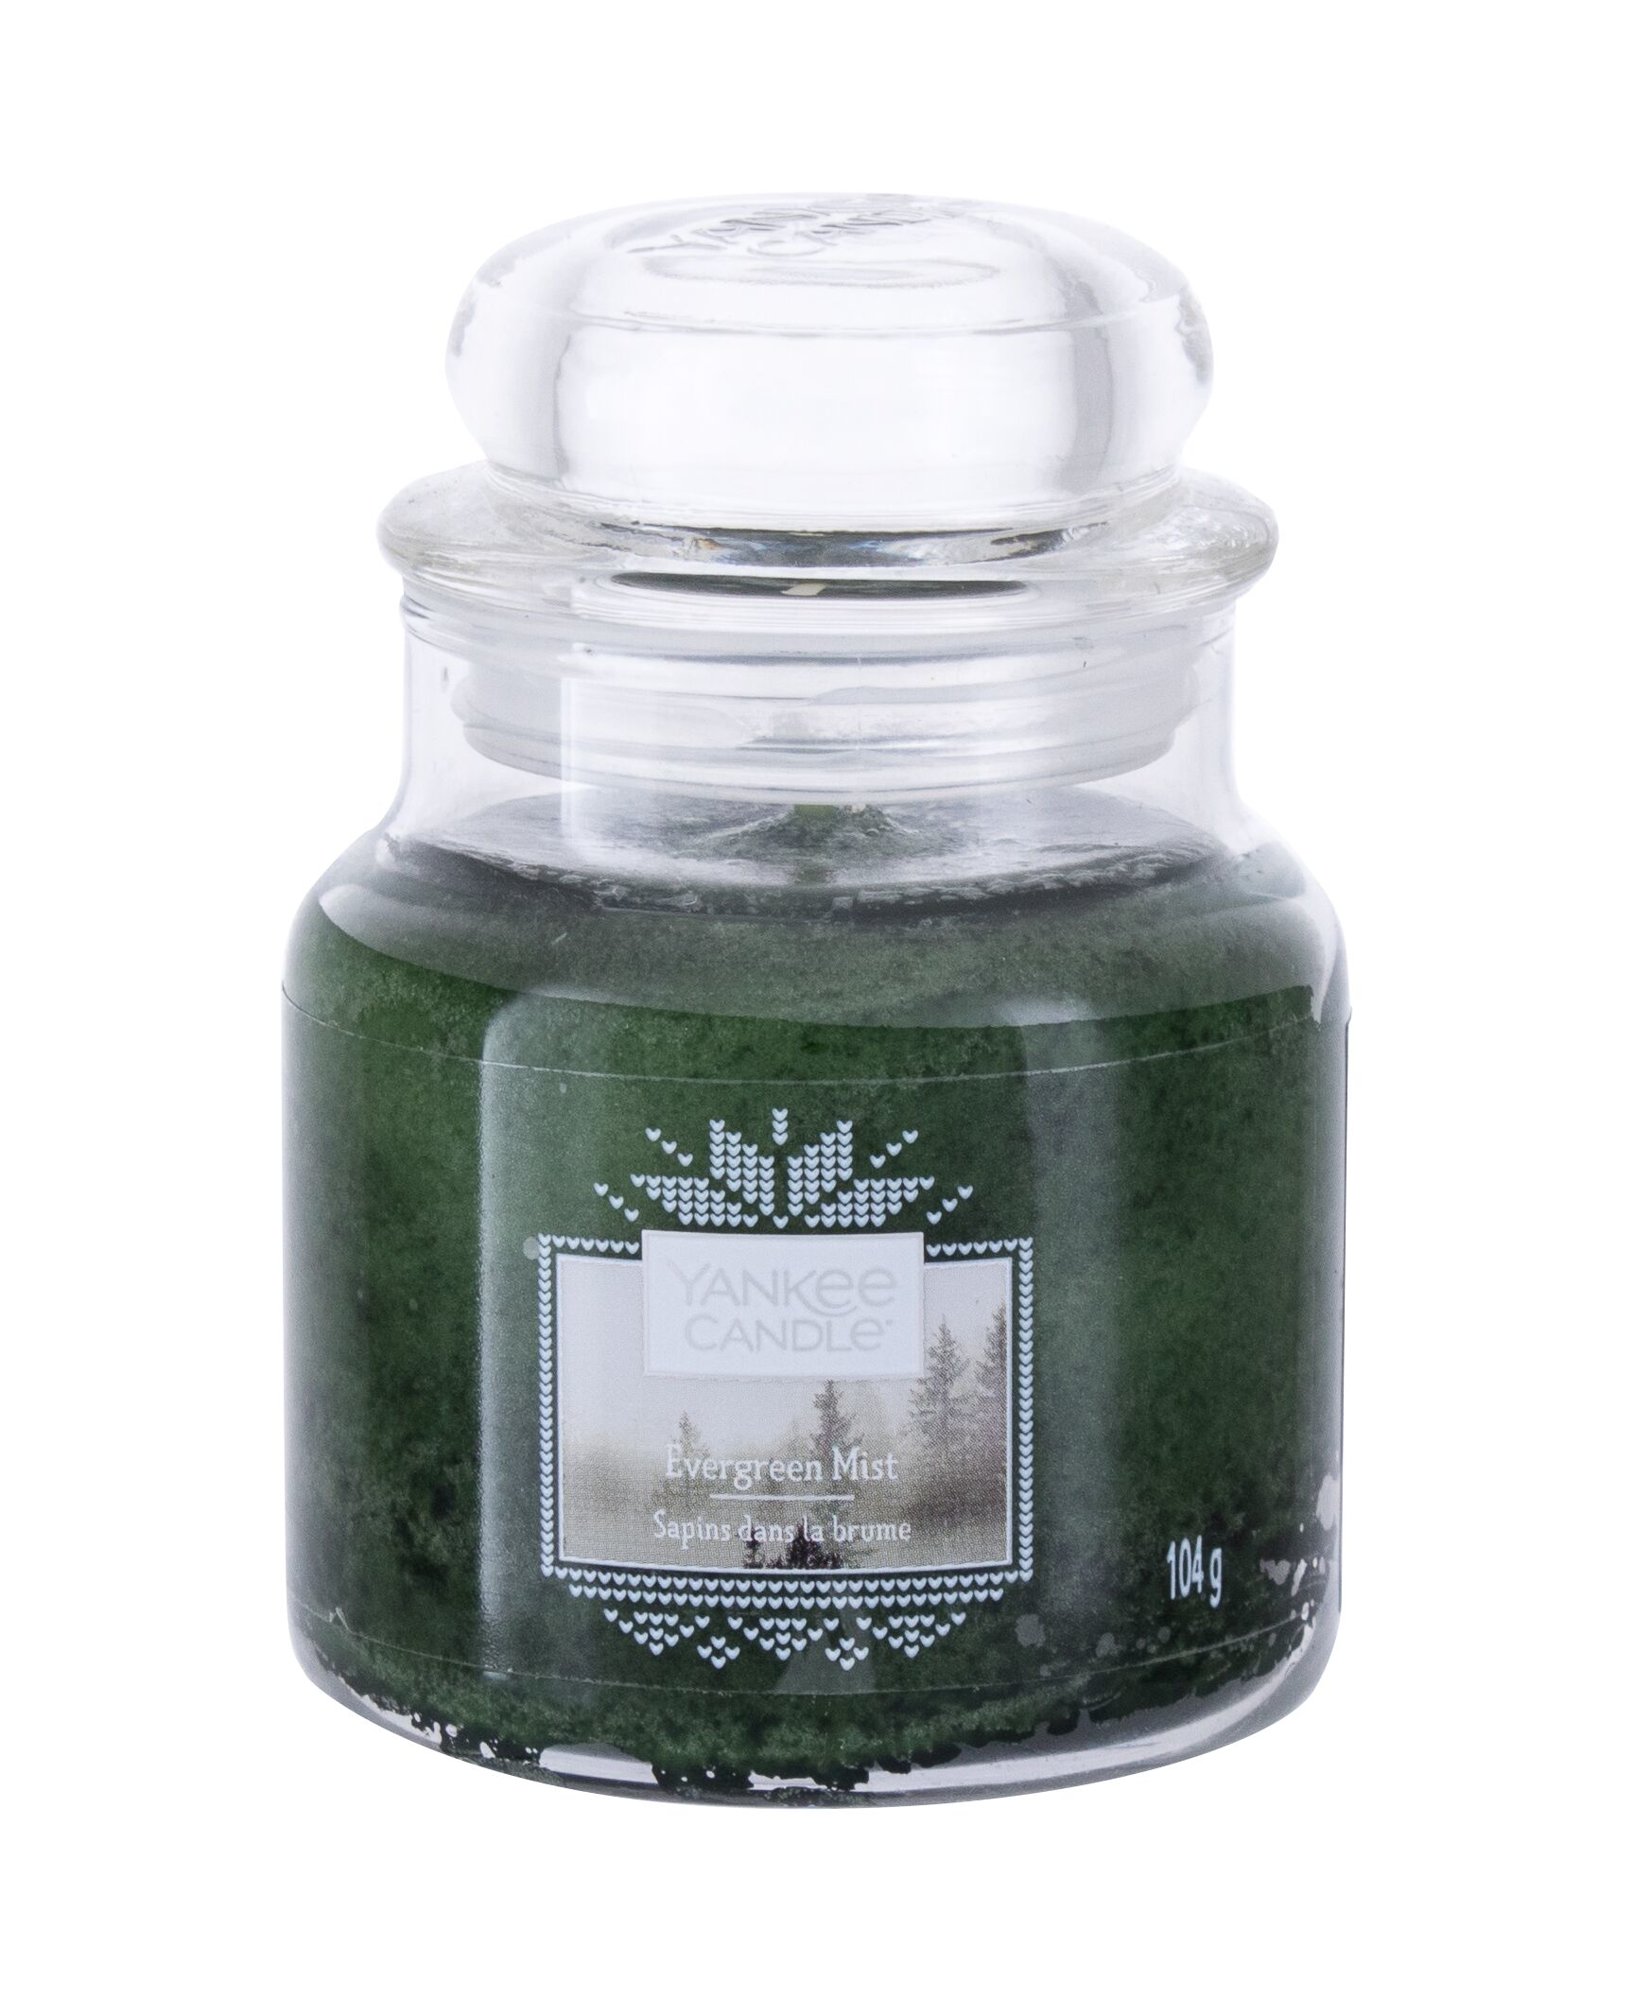 Yankee Candle Evergreen Mist 104g Kvepalai Unisex Scented Candle